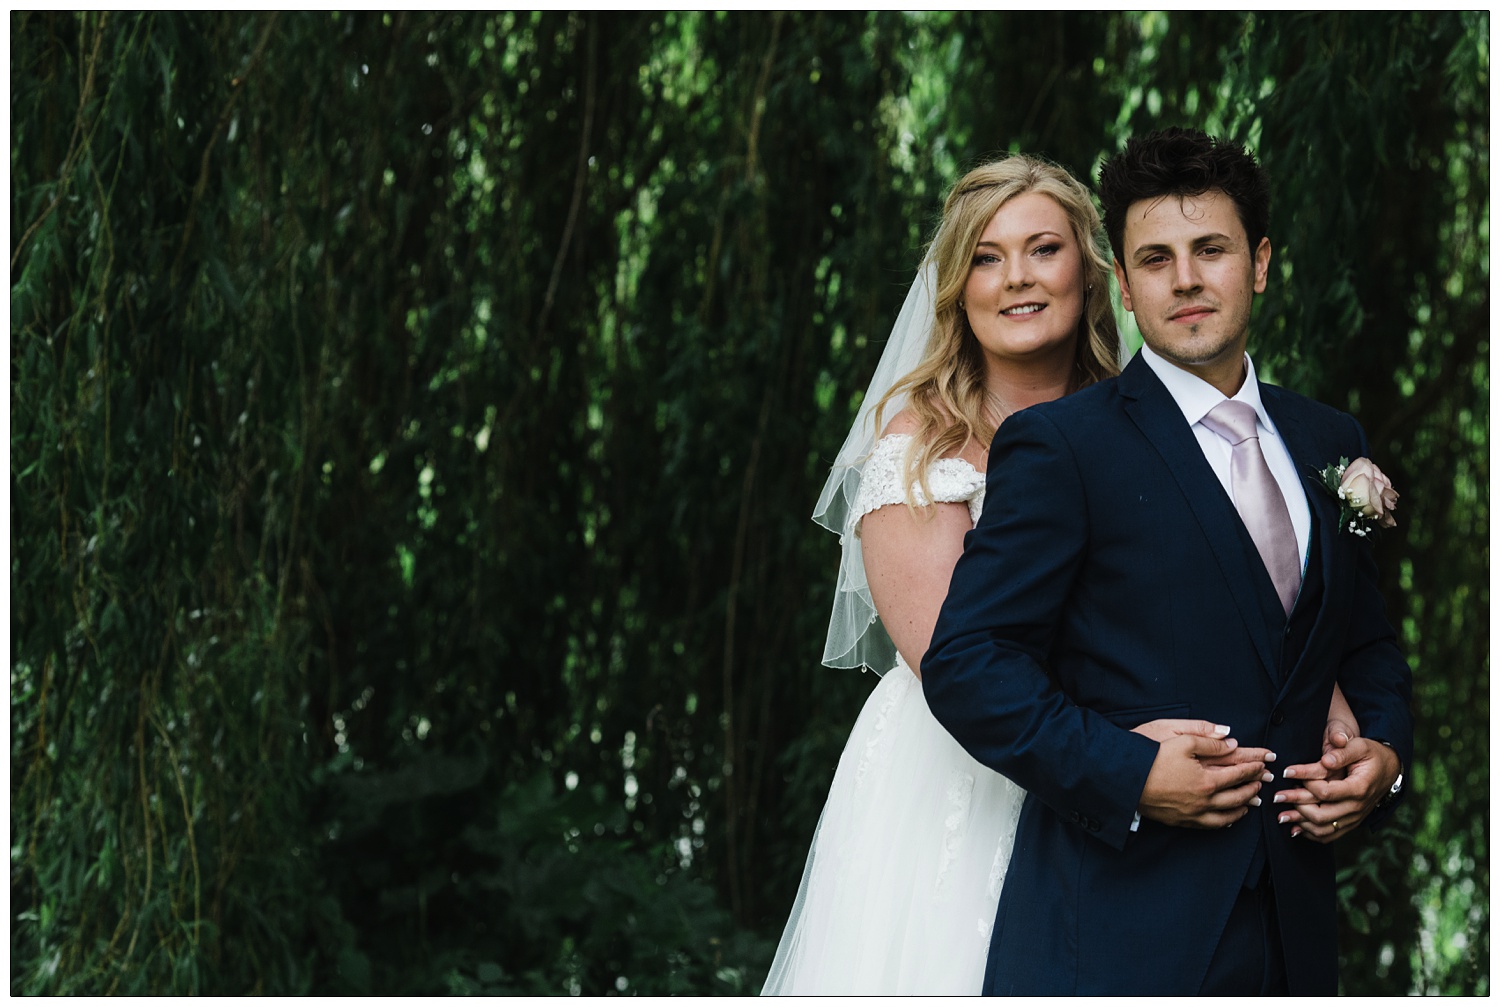 In front of a willow tree a man is standing in front of the woman he just married. She puts her arms around him. She has a white dress, veil and blonde hair. He is wearing a navy suit with a pale pinkish tie.